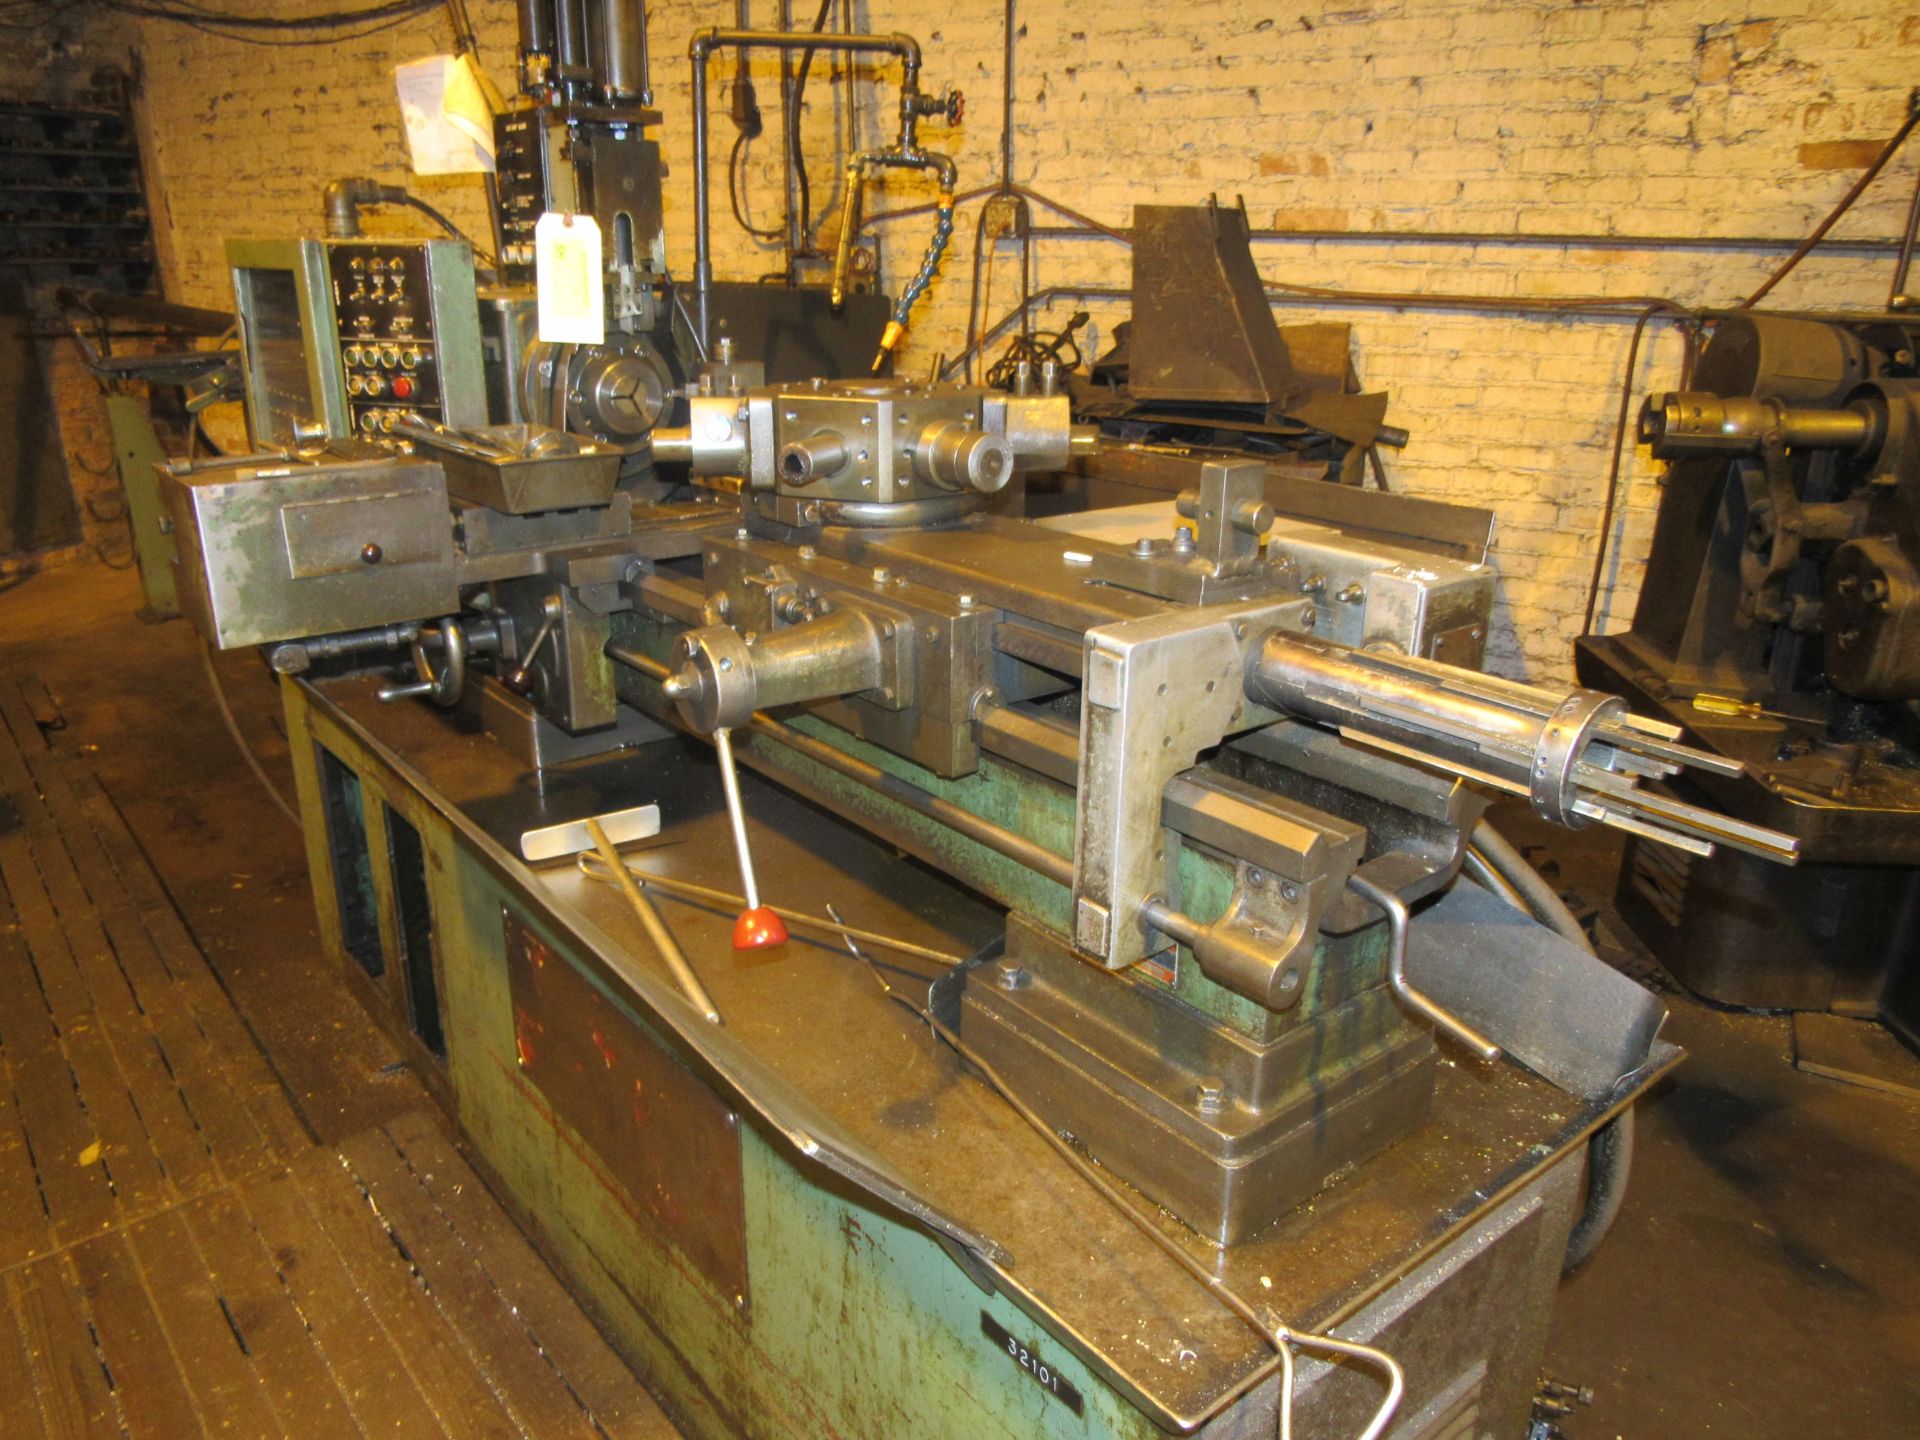 Logan model 450 collet lathe, 15" swing, 4' bed, tool post, tool turret, collet closing chuck - Image 3 of 7